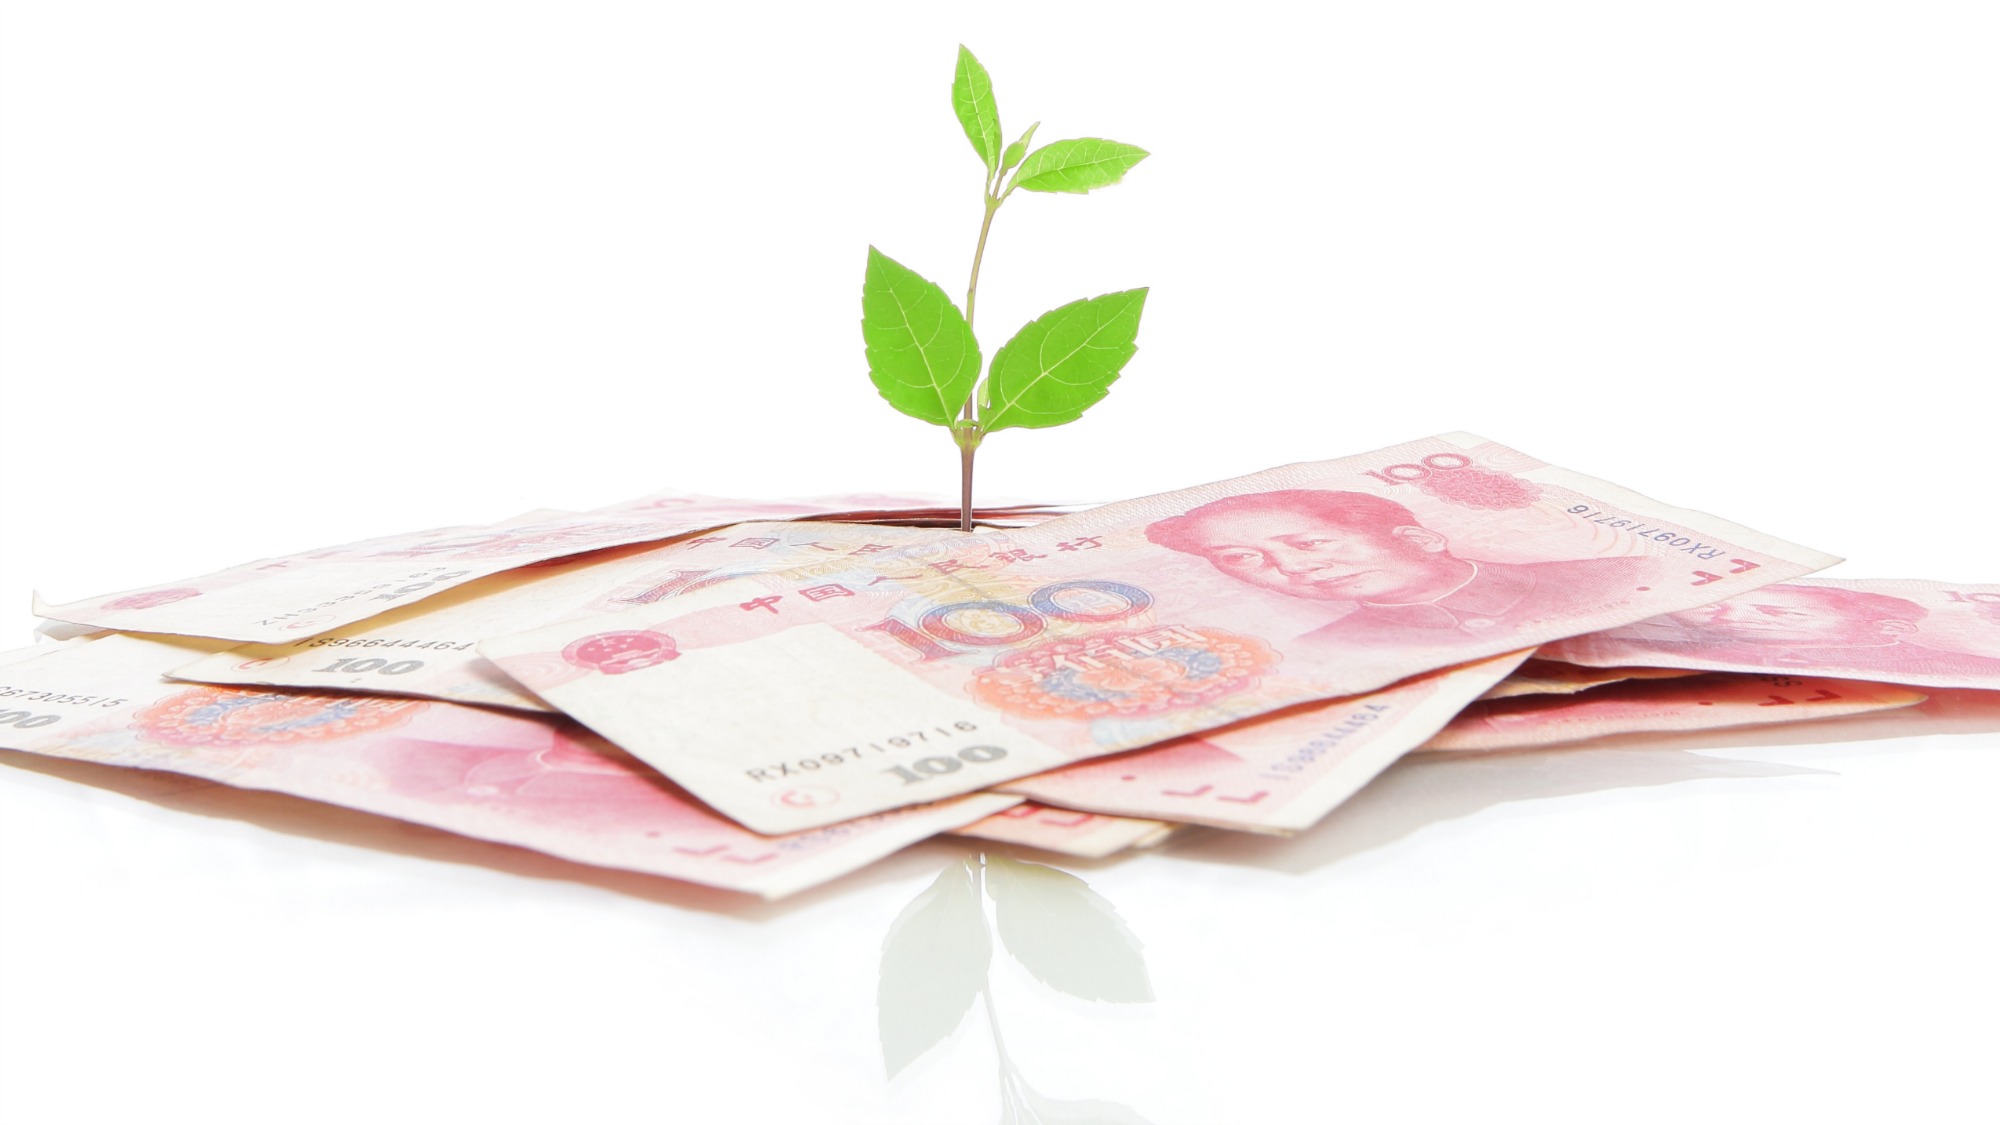 Chinese currency and a seedling